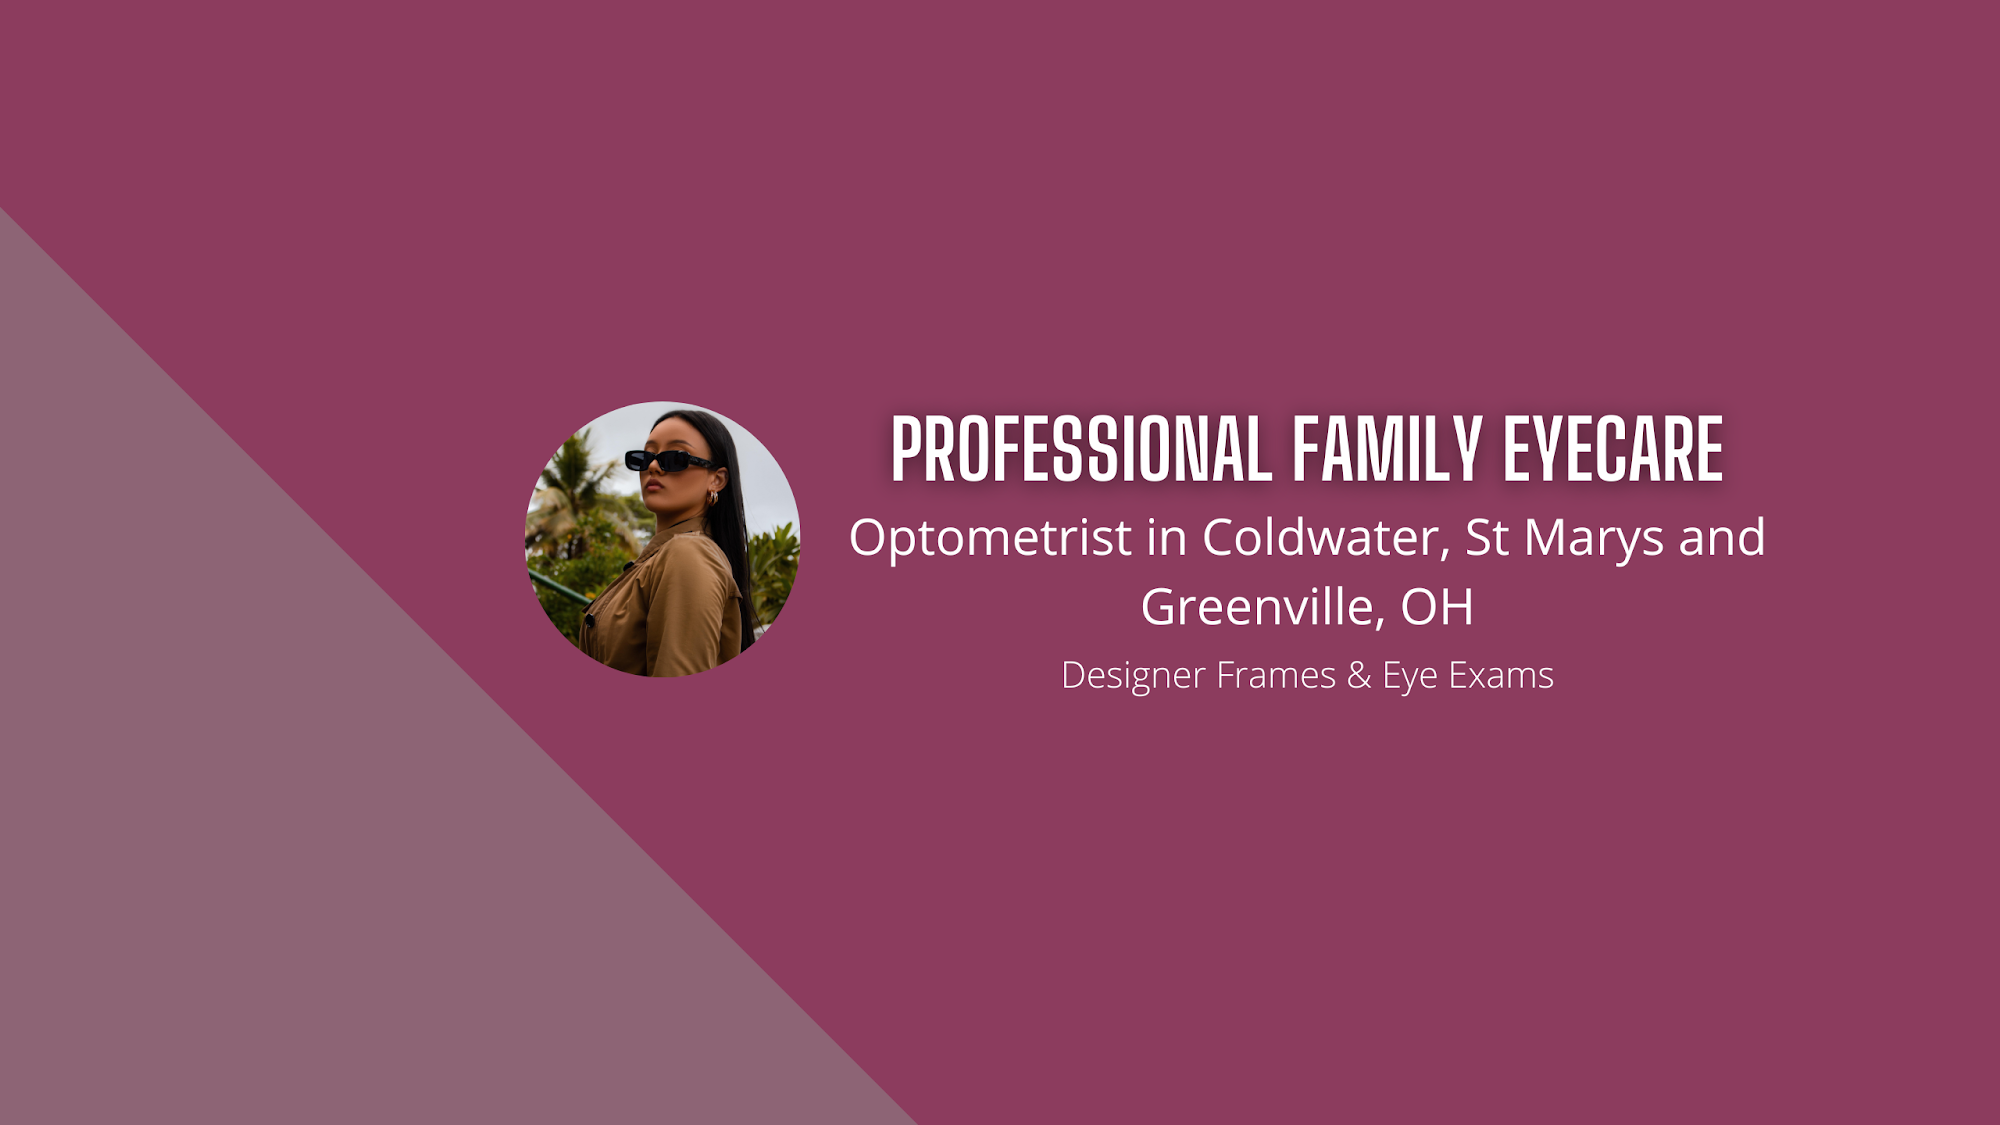 Professional Family Eyecare 201 S 2nd St, Coldwater Ohio 45828